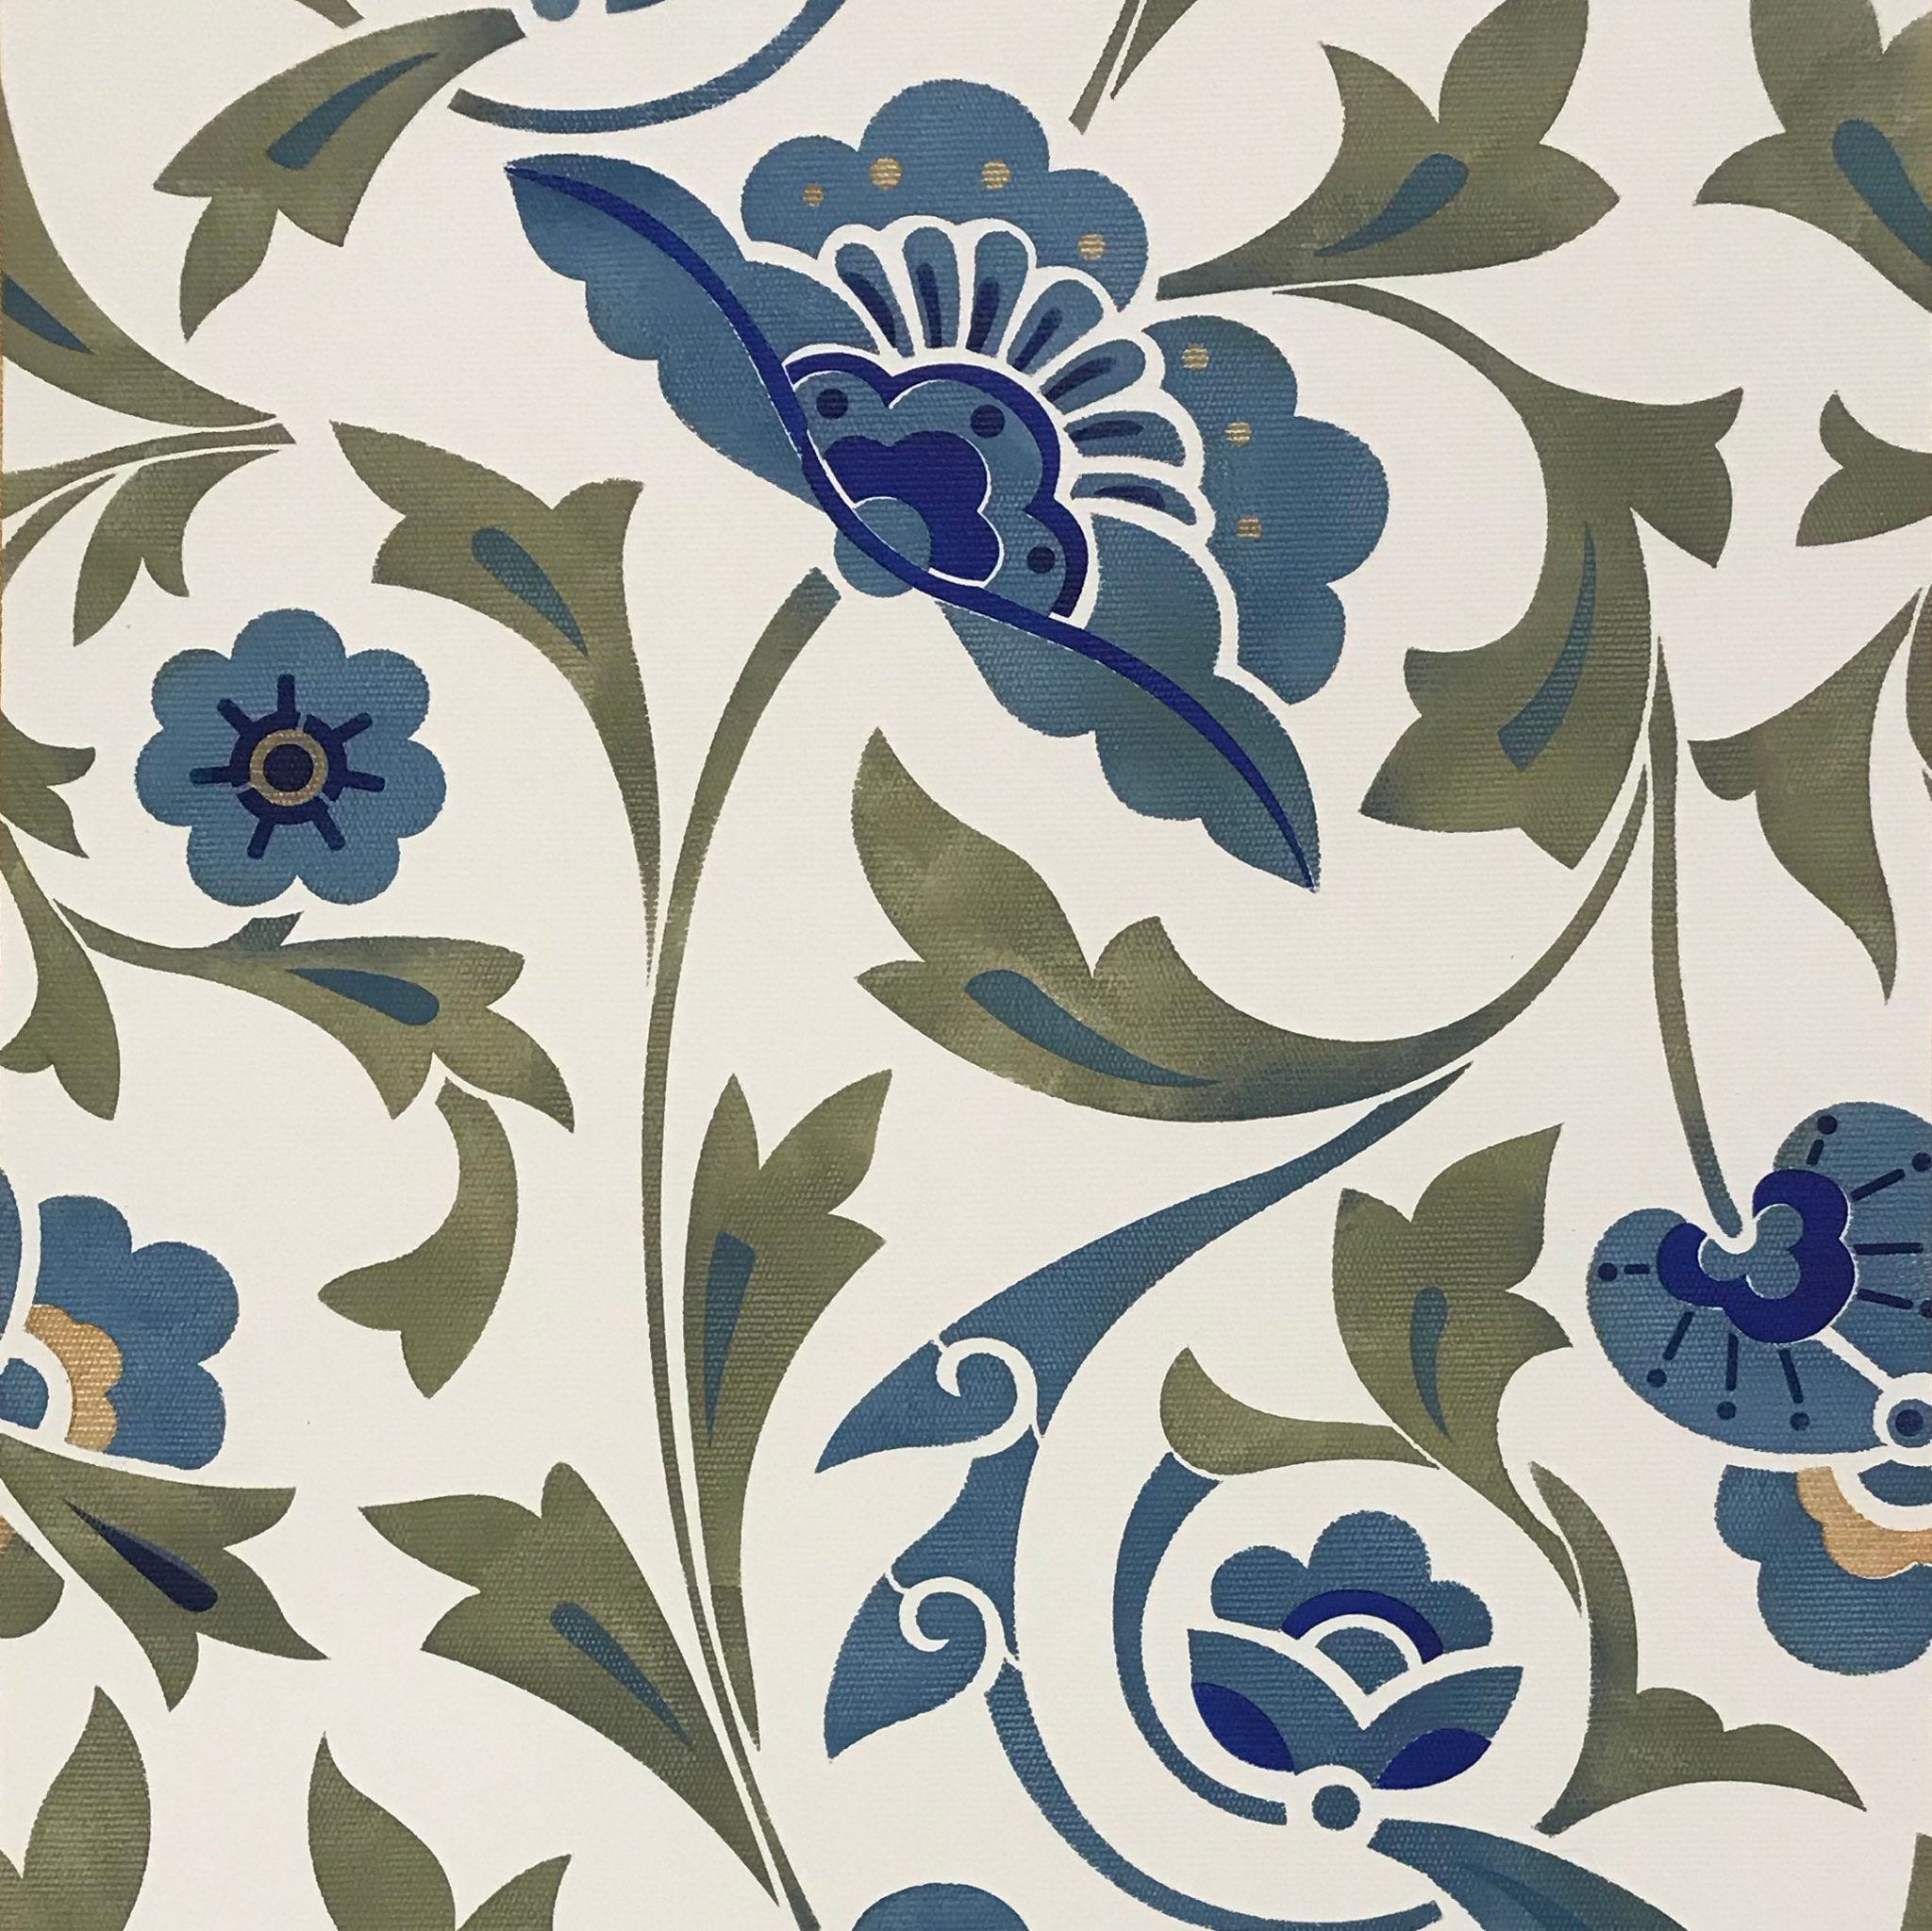 A close-up of the all-over floral pattern adorning this floorcloth.